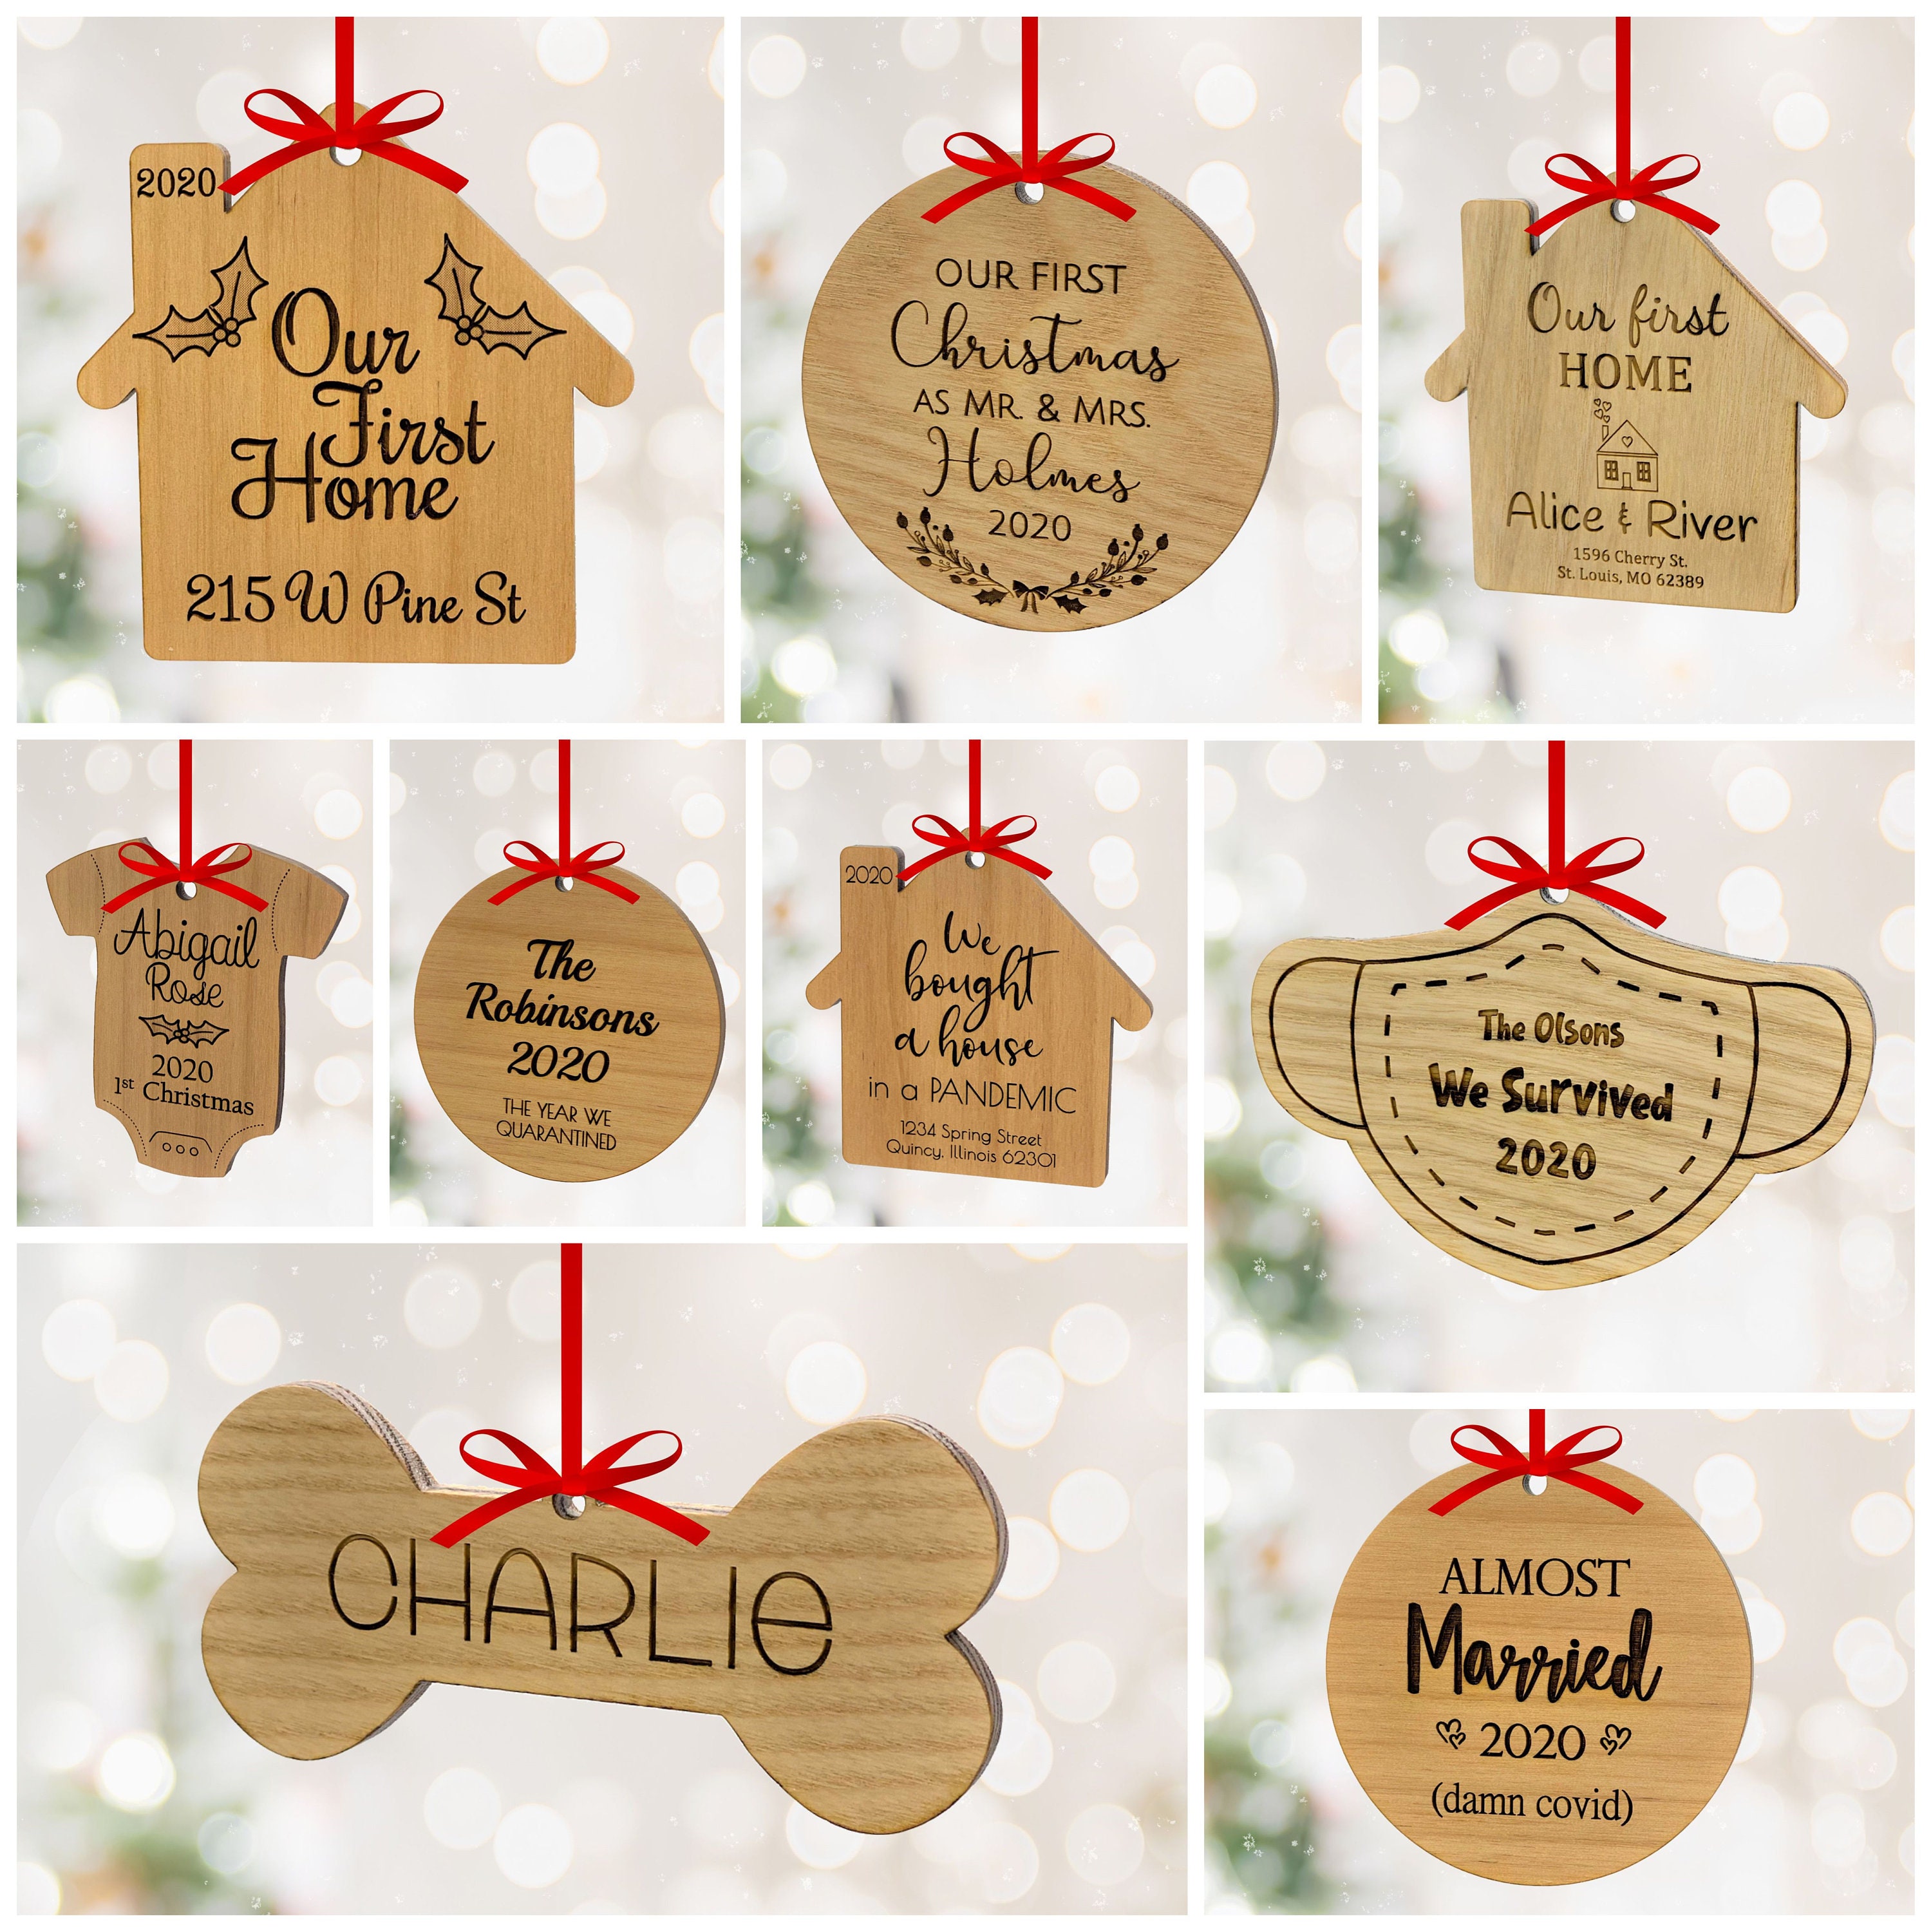 Engraved Christmas Stocking Name Tags w/ 6 Font Option - Wooden Name Tags  for Christmas Presents, Personalized Gift Tag, Custom Letters for Xmas 